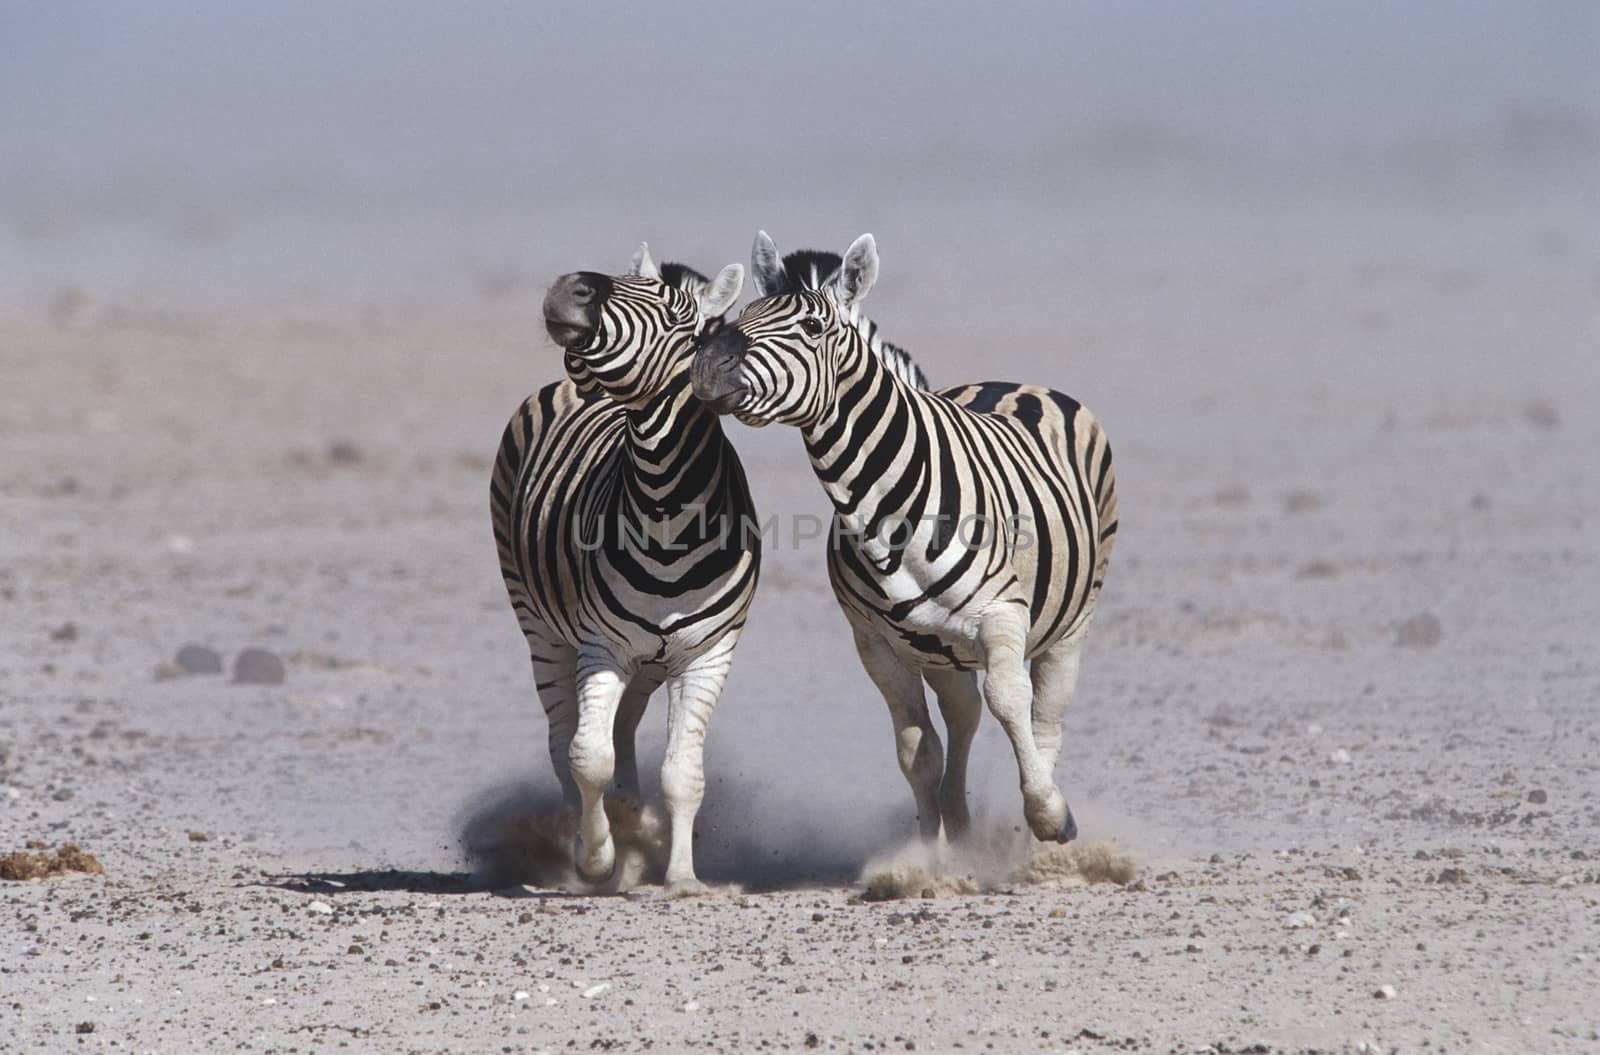 Namibia, Etosha Pan, two Burchell's Zebras running side by side